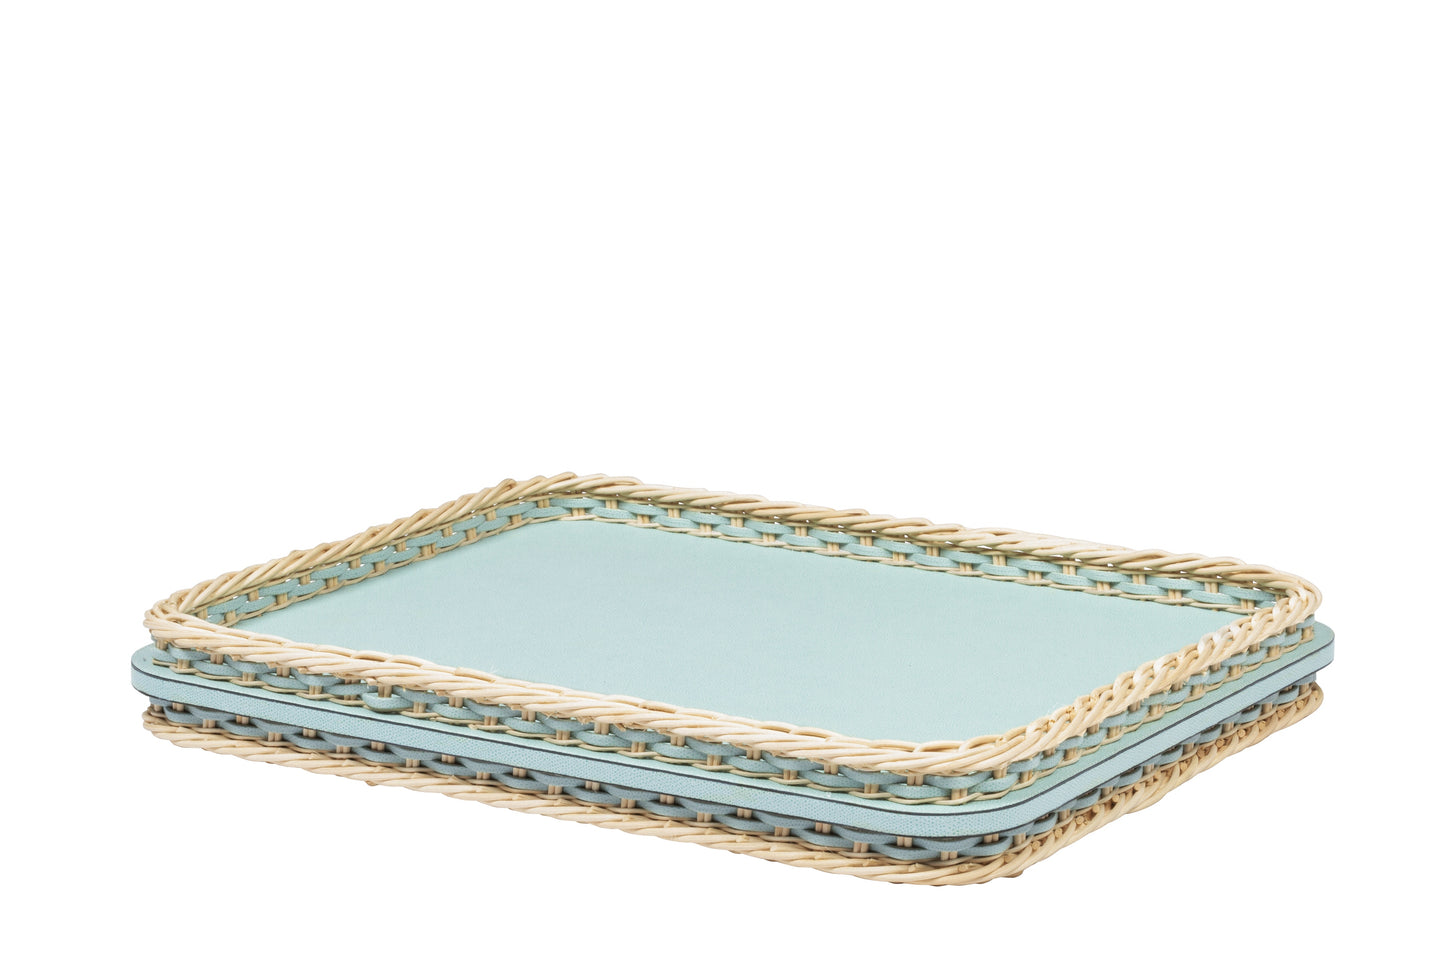 Pigment France Reims Leather & Rattan Bed Tray | Luxury Bedroom Accessories, Elegant Breakfast Trays & Gift Items | 2Jour Concierge, #1 luxury high-end gift & lifestyle shop